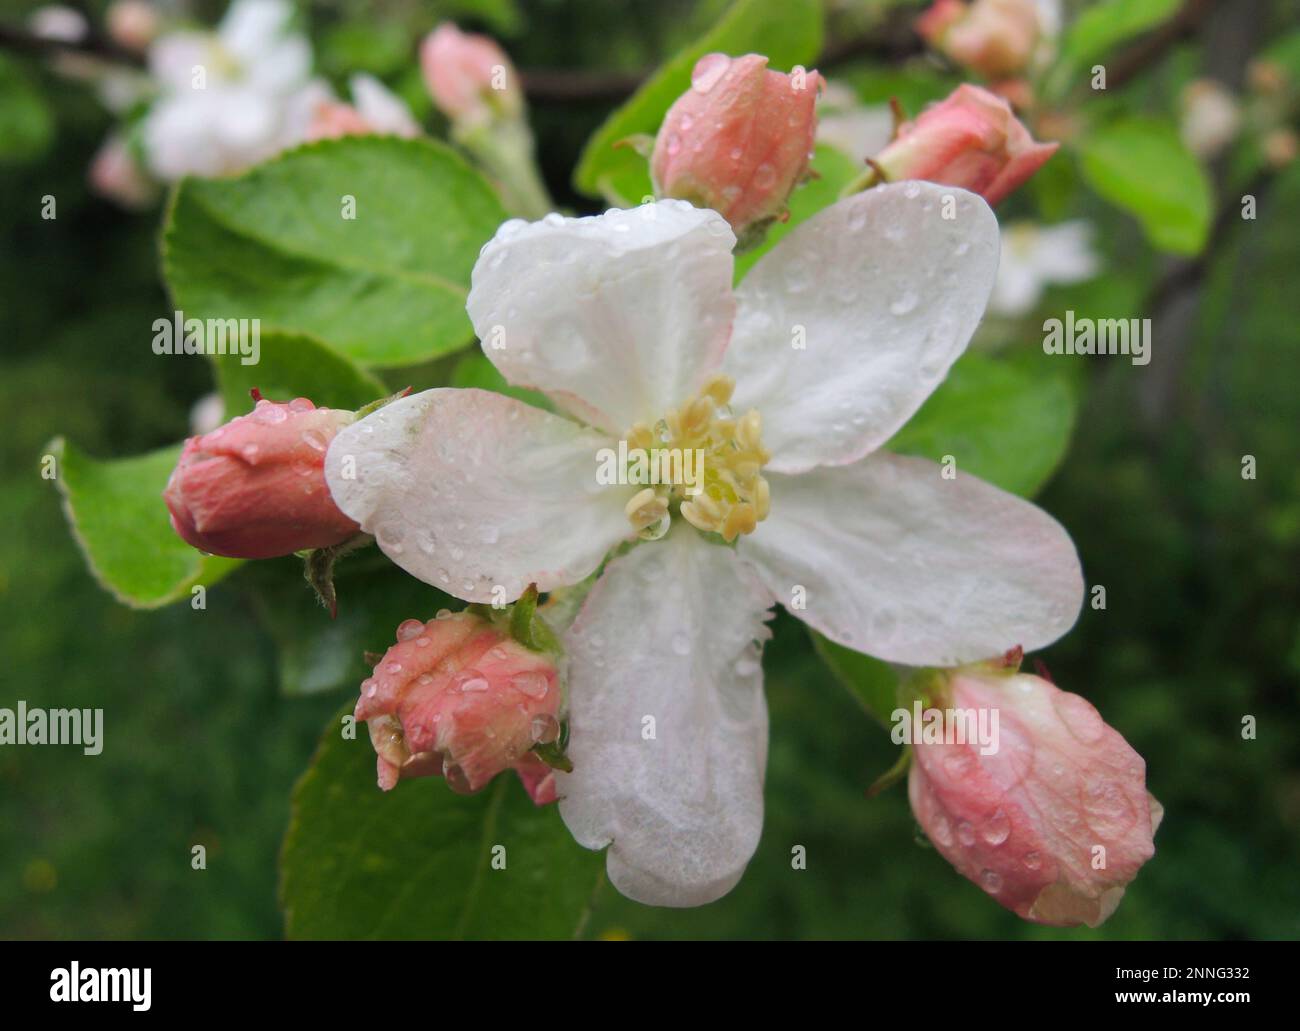 Open flower and young buds of blossoming apple tree with water drops on a petals and leaves closeup photo Stock Photo